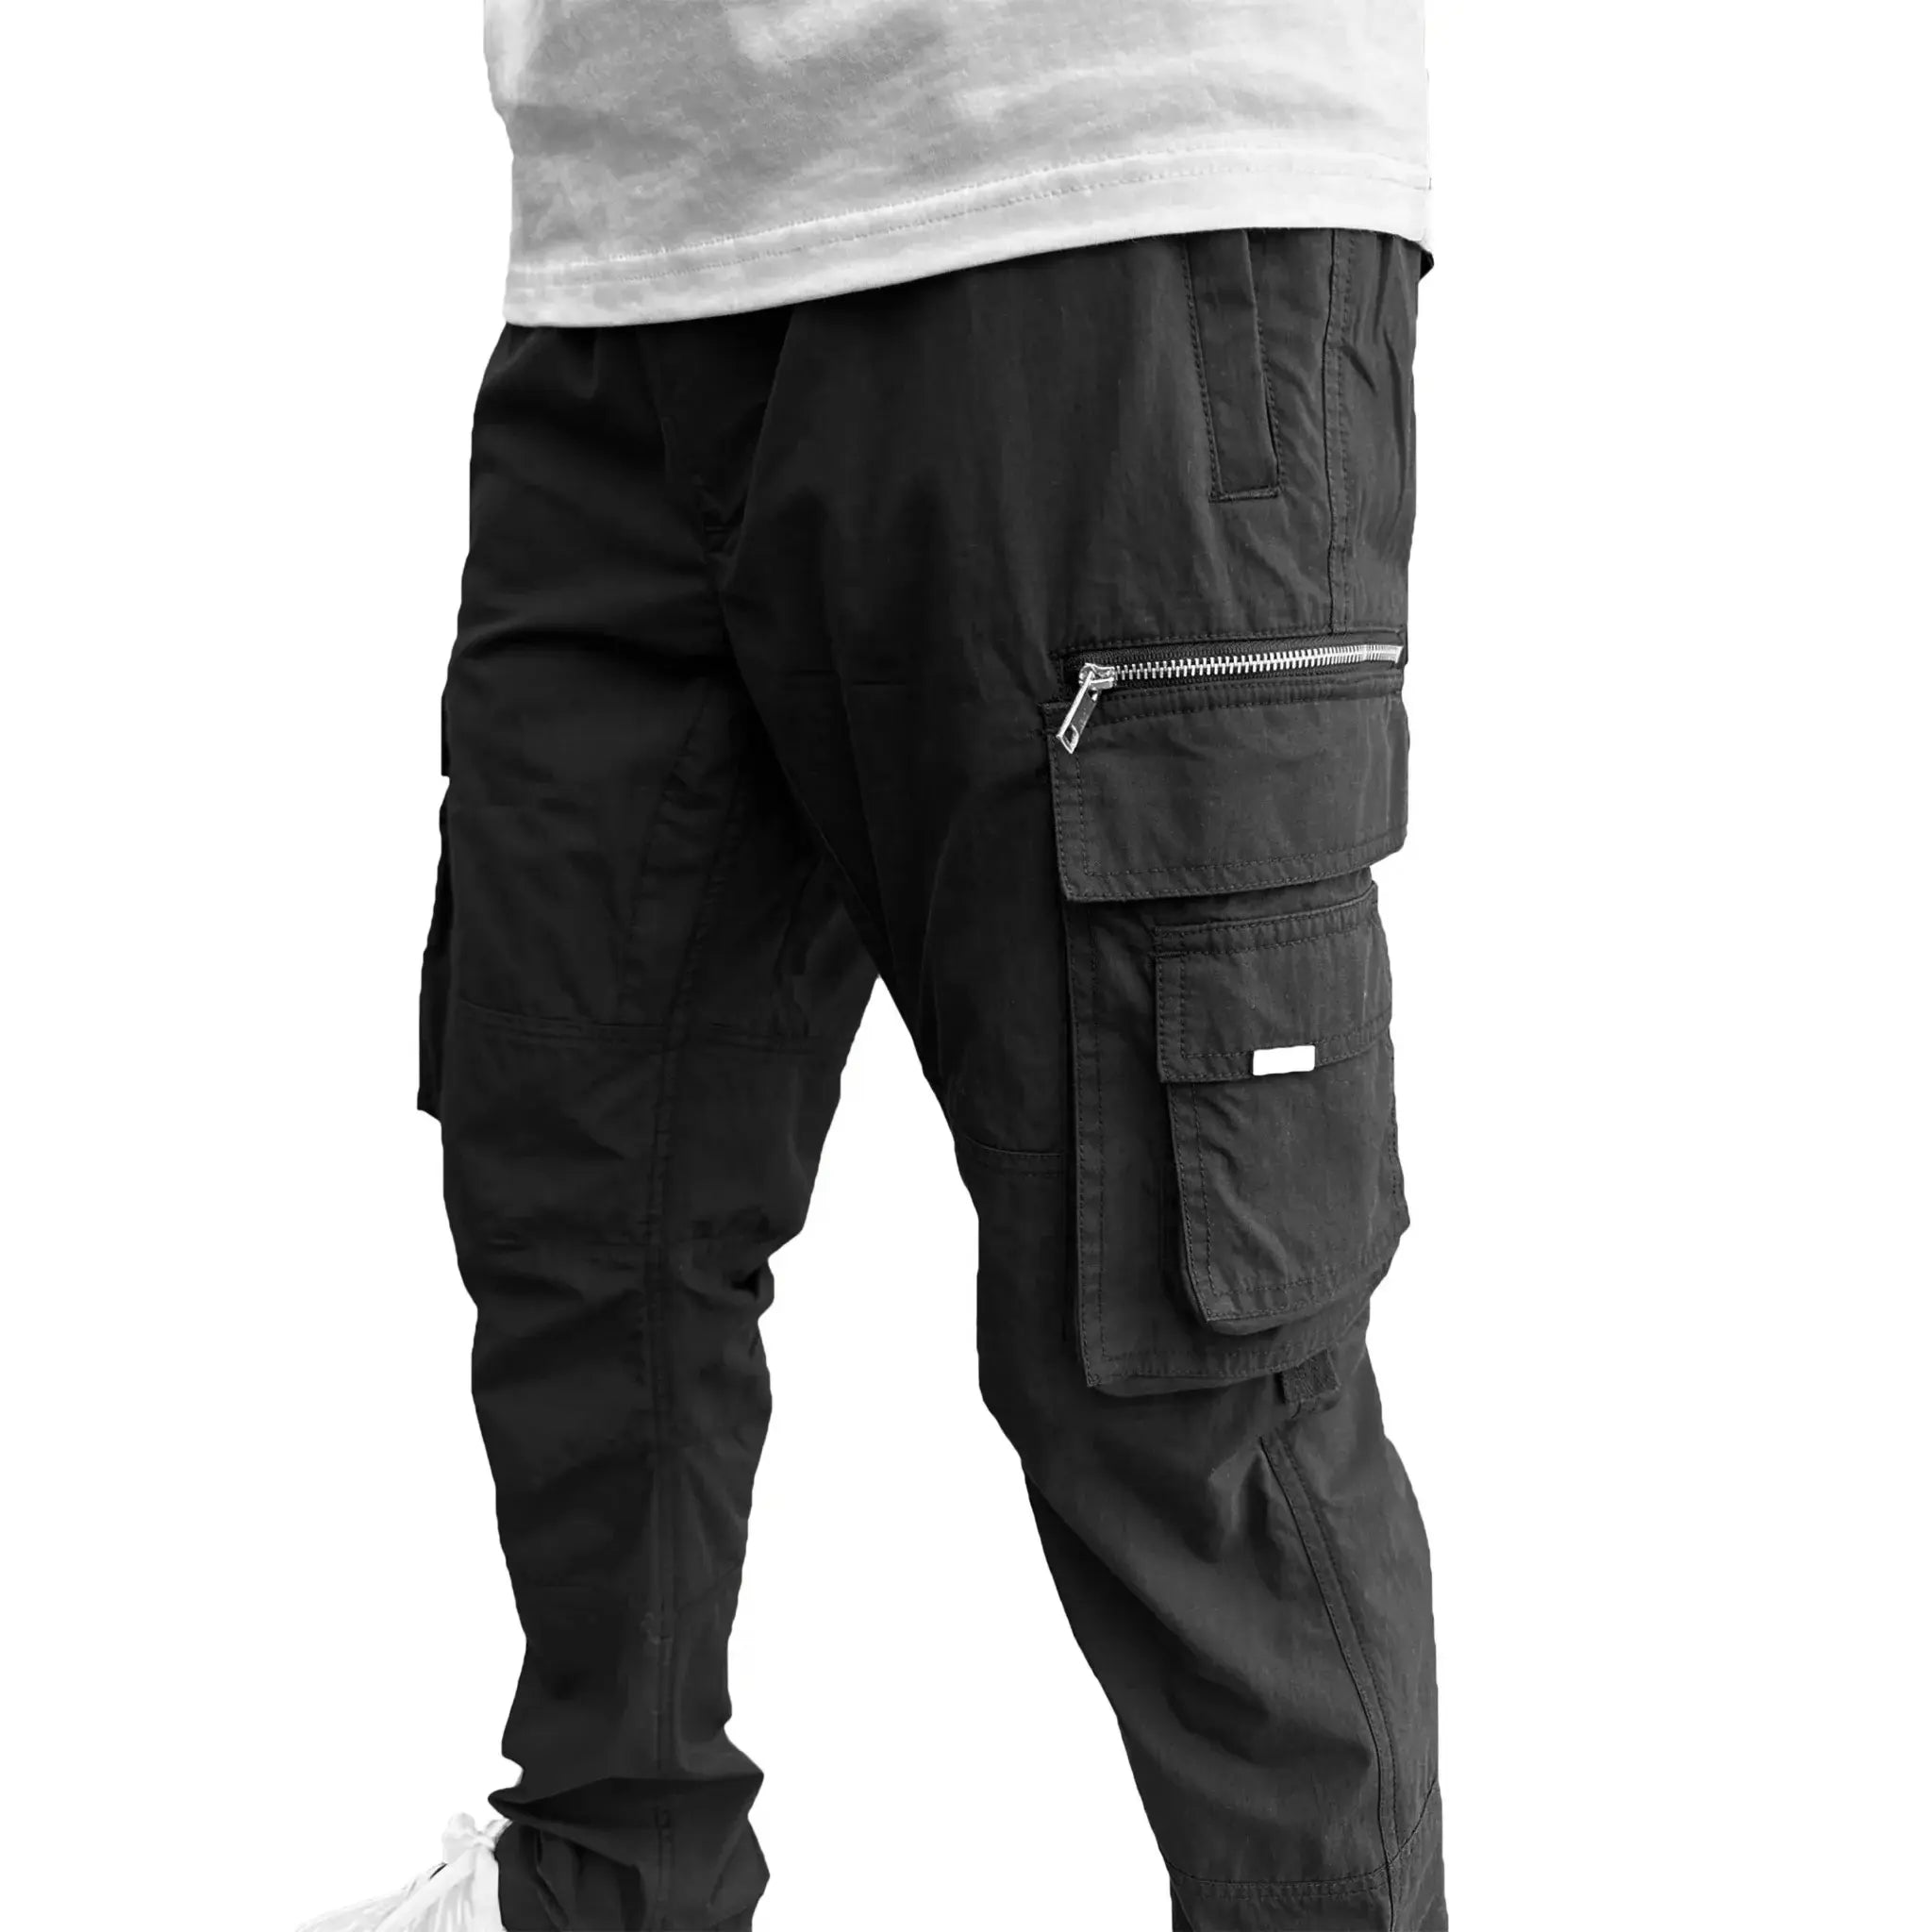 Detail view of SIARR Military Black Cargo Pants